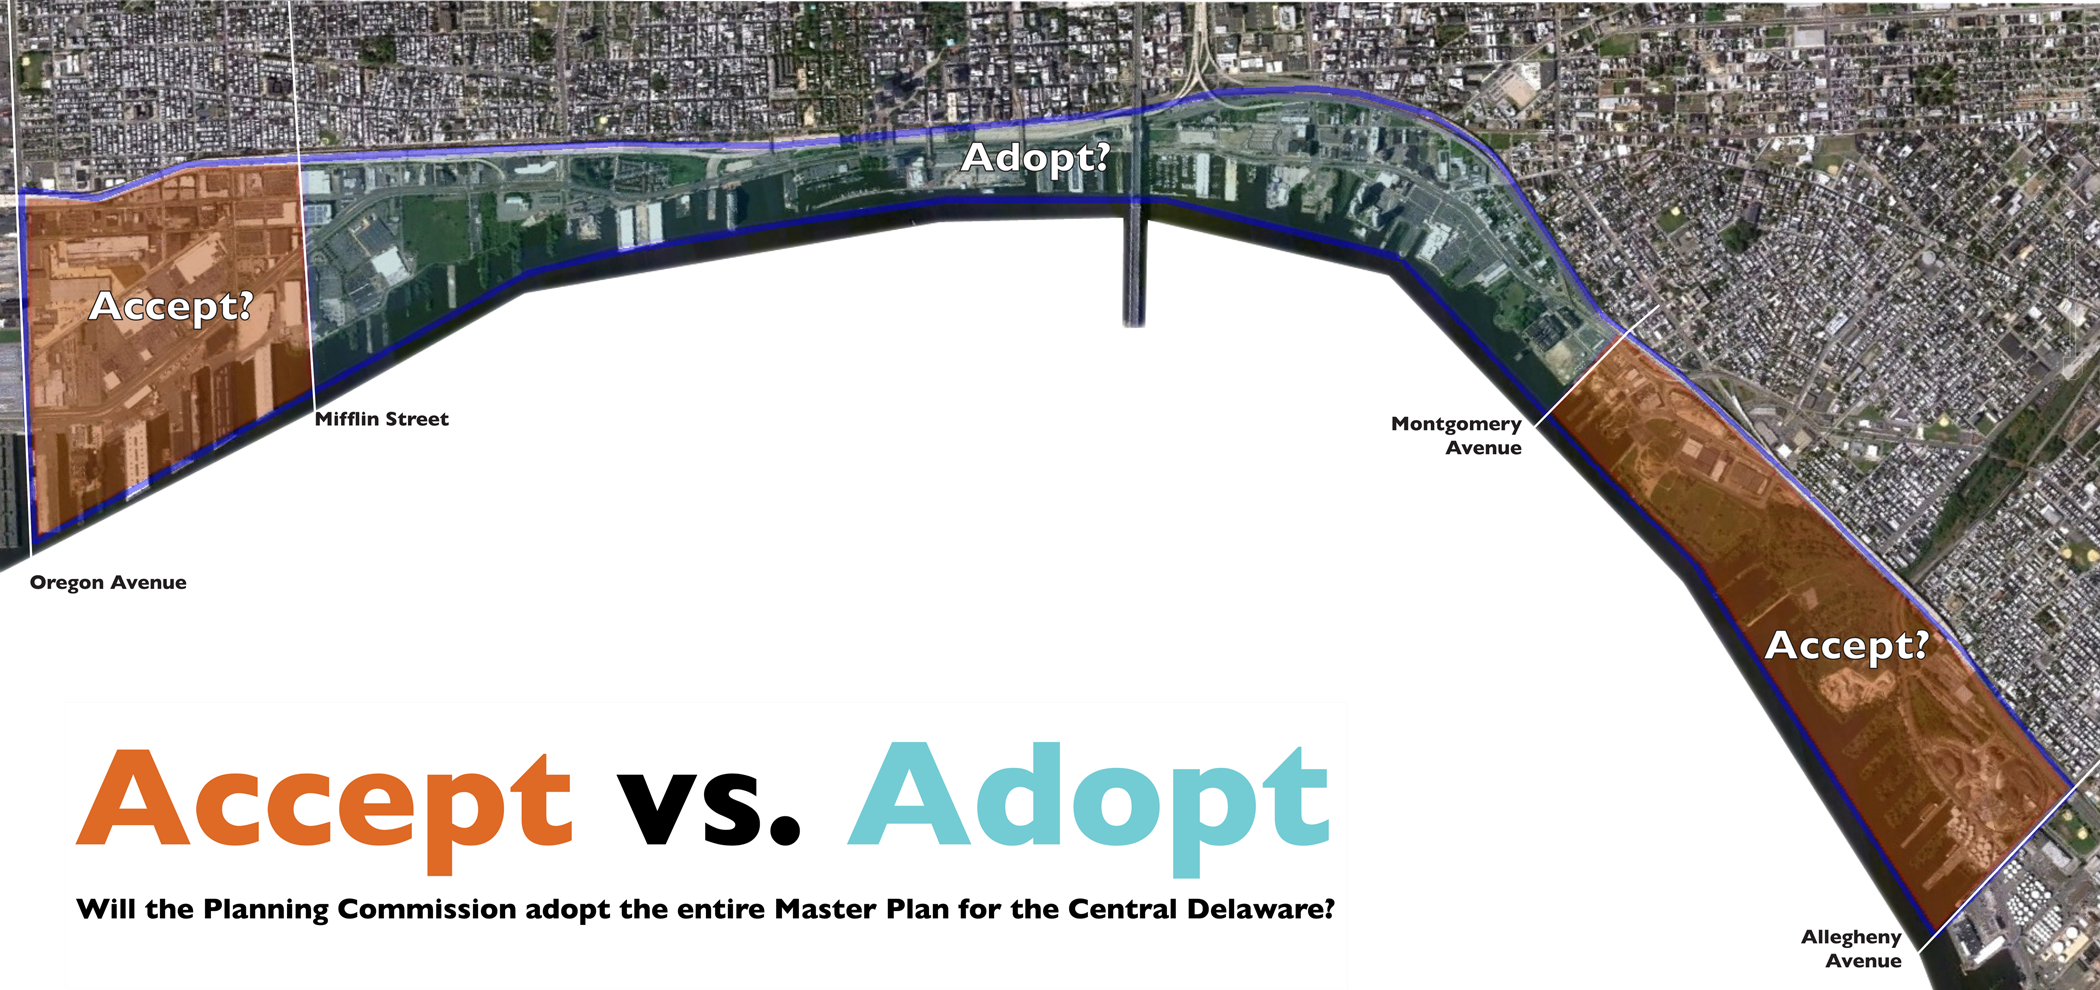 Will the Planning Commission adopt the entirety of the Master Plan for the Central Delaware, or will it cut off the ends?